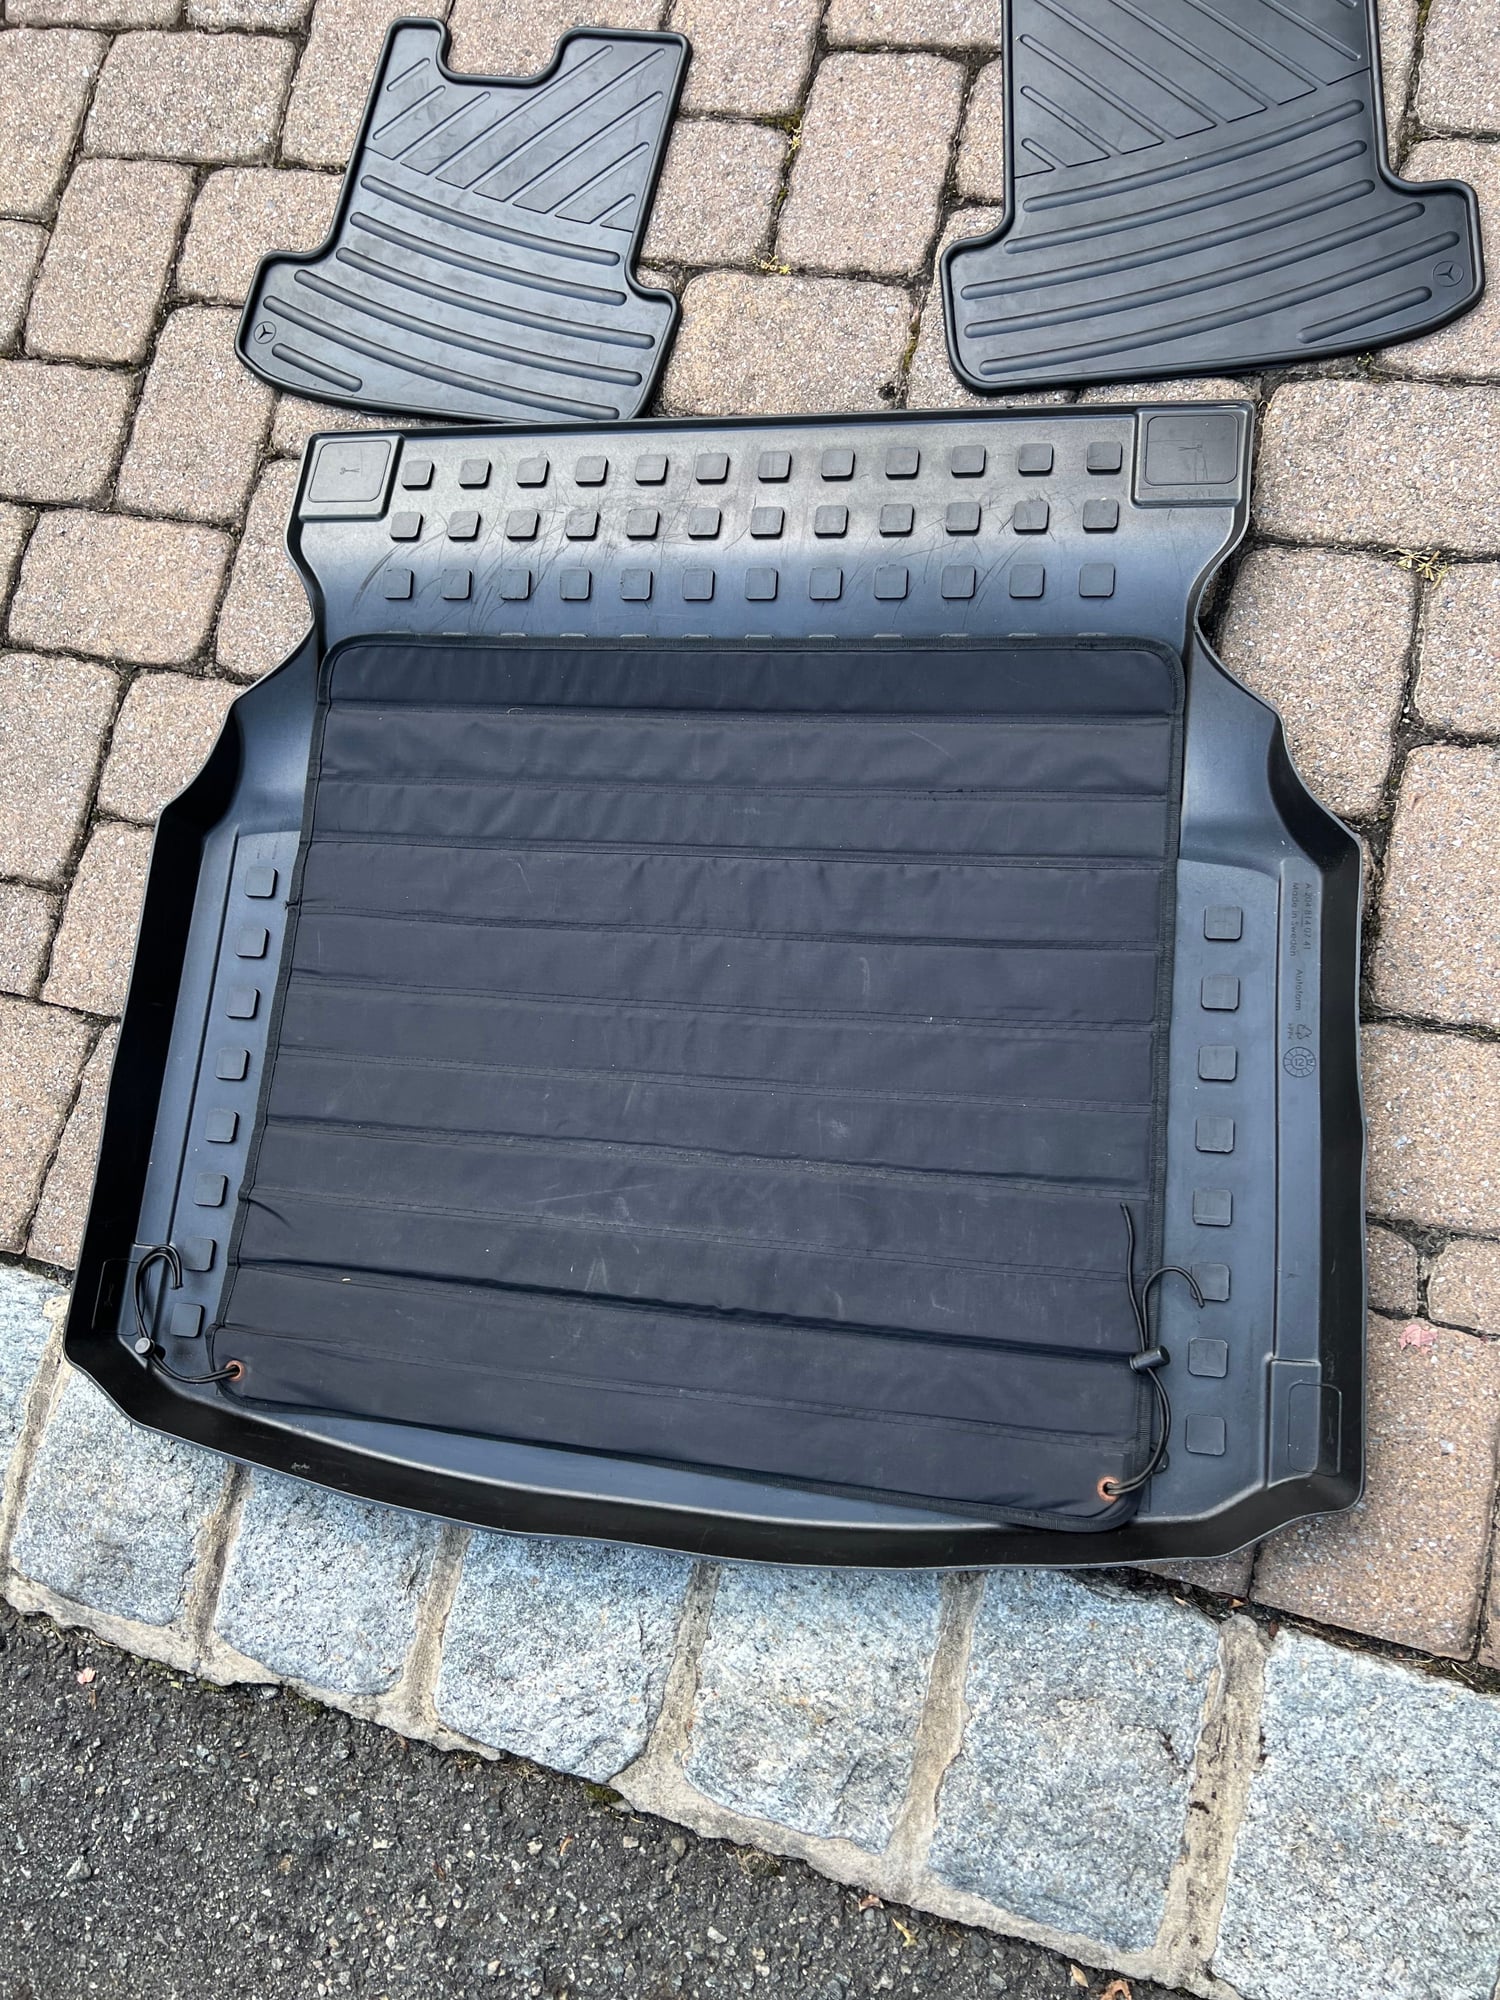 Interior/Upholstery - NJ: W204 C-Class Coupe All Weather Mats and Trunk Mat - Used - 2012 to 2015 Mercedes-Benz C63 AMG - Waldwick, NJ 07463, United States